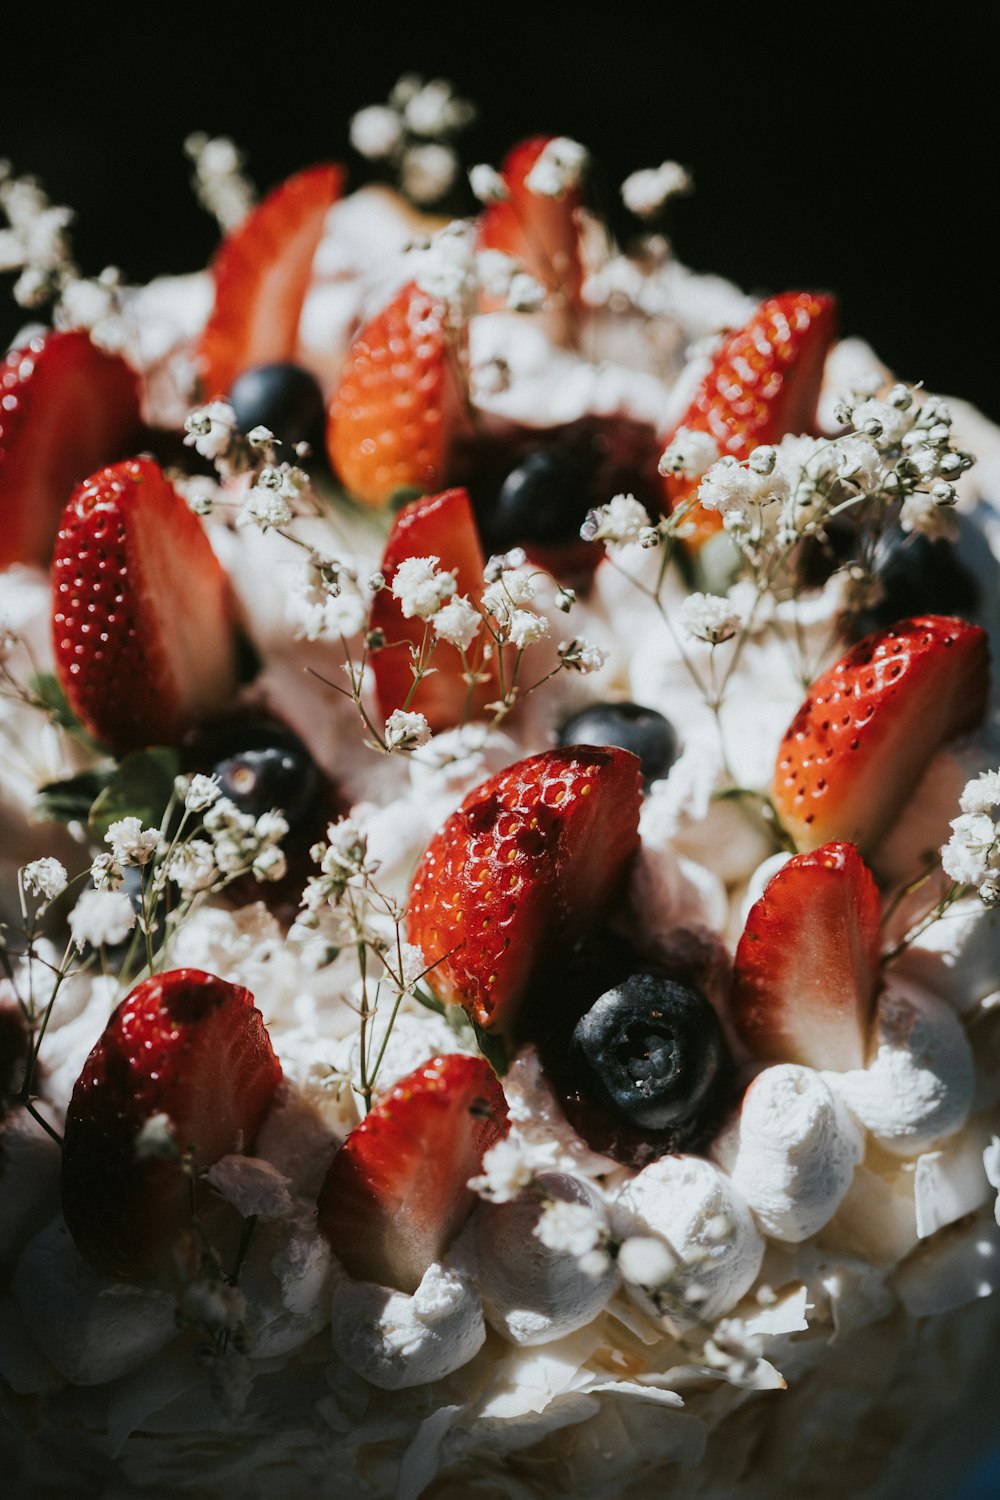 a close up of a cake with strawberries and blueberries